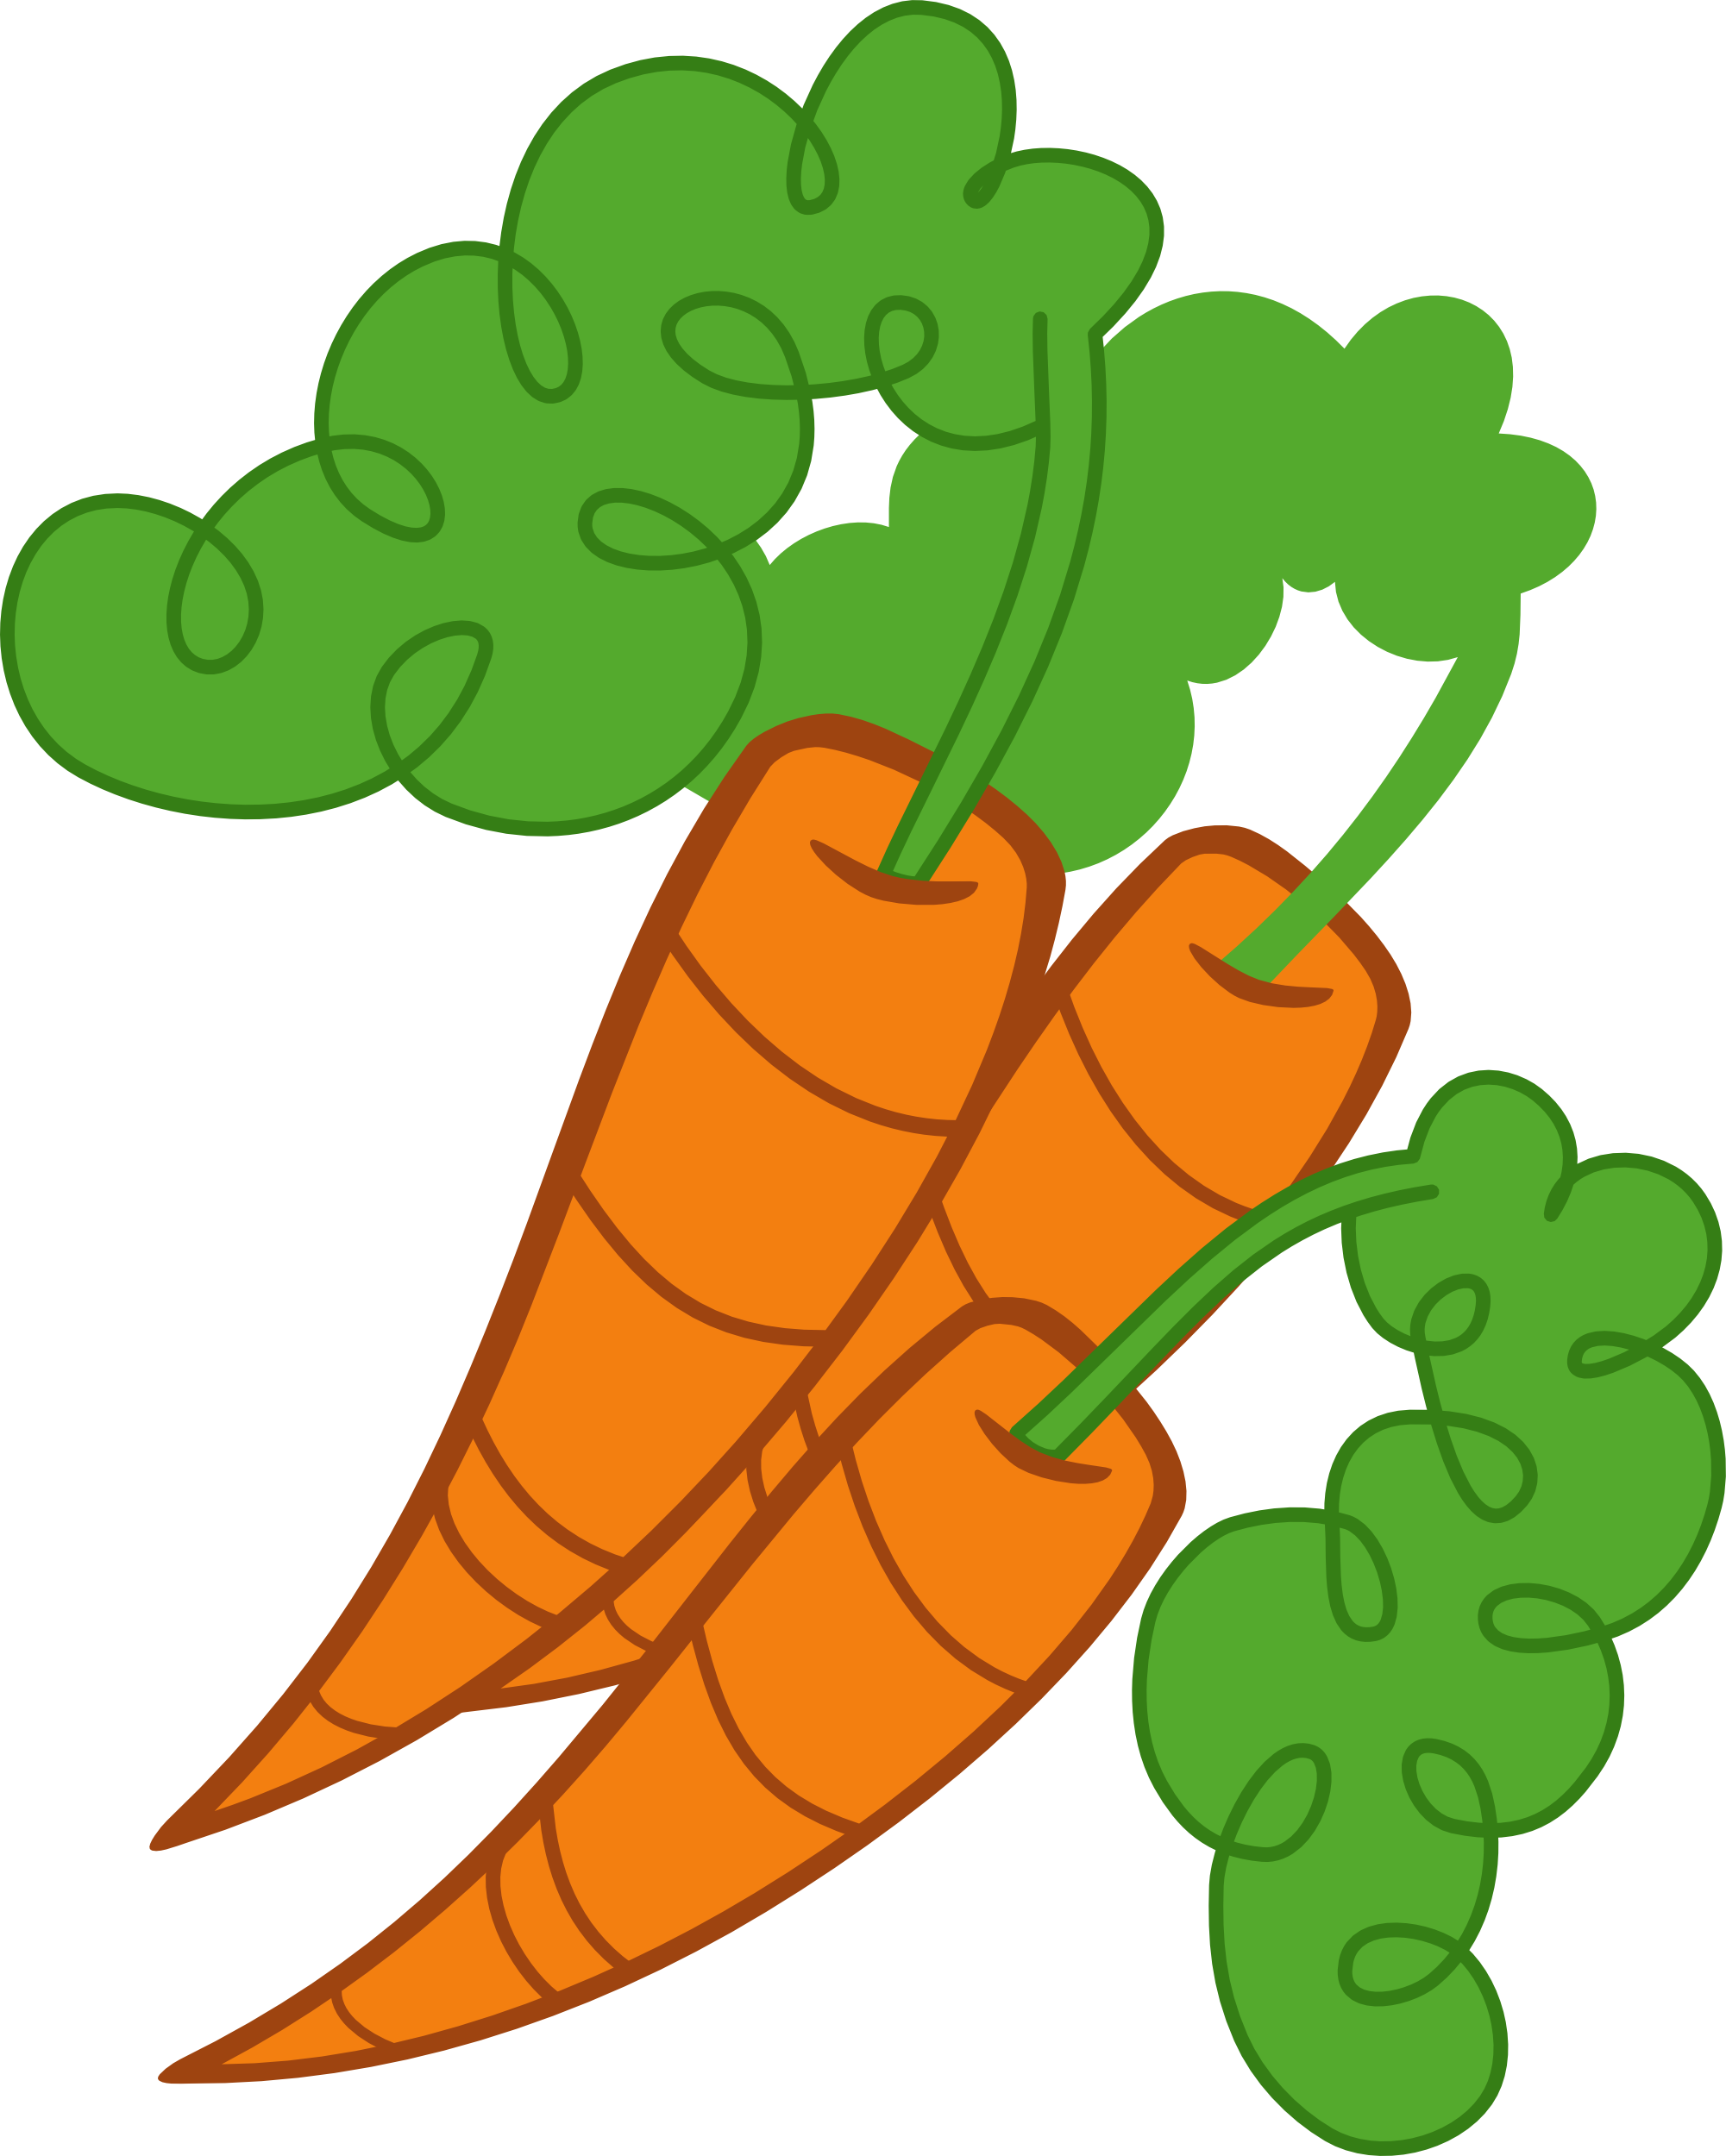 See Here Carrot Clipart Black And White Images Free - Mlp Carrot Top Cutie Mark (2001x2500)